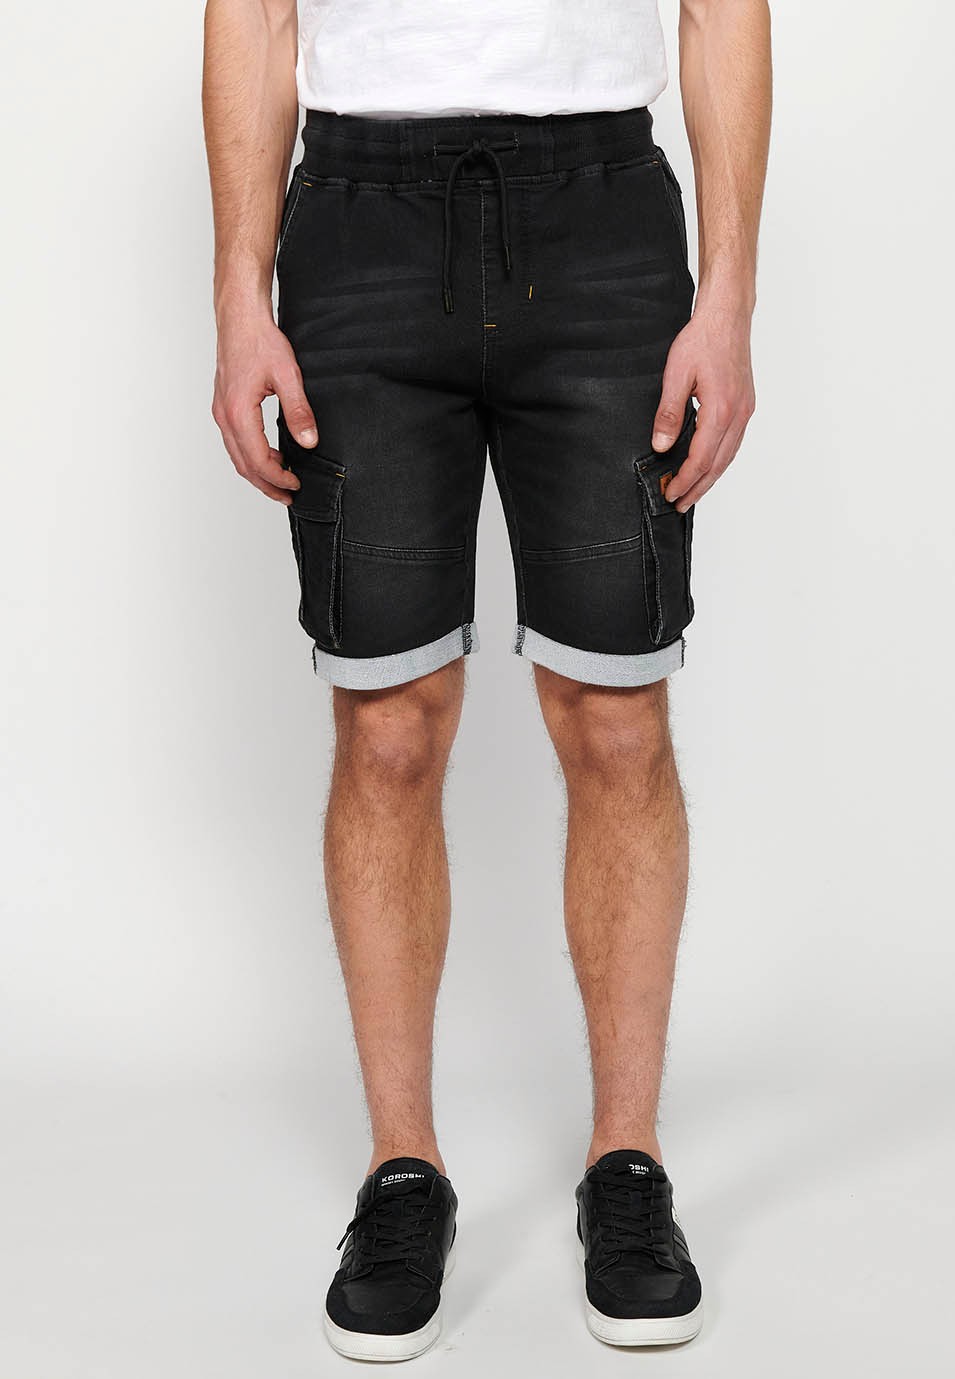 Denim Bermuda cargo jogger shorts finished with a turn-up, Adjustable waist with elastic and drawstring, Side pockets with flap, Black for Men